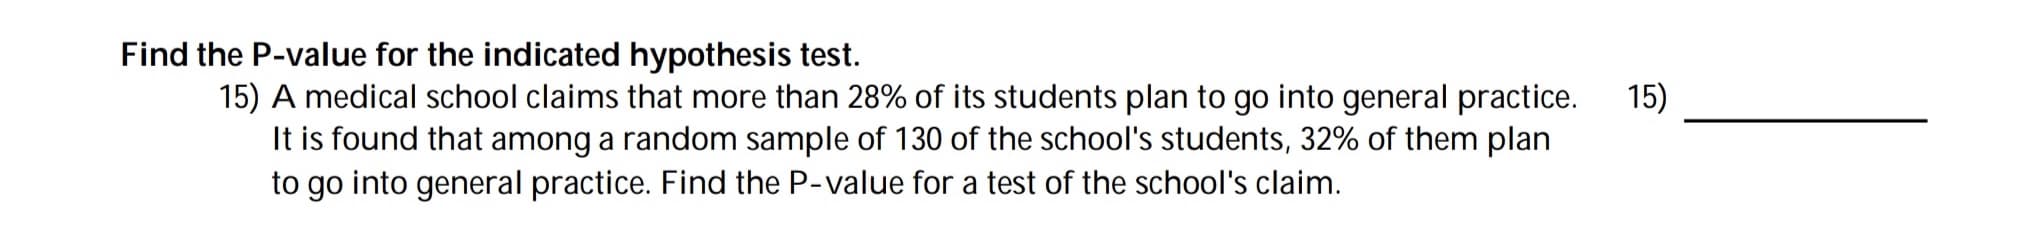 Find the P-value for the indicated hypothesis test.
15) A medical school claims that more than 28% of its students plan to go into general practice.
It is found that among a random sample of 130 of the school's students, 32% of them plan
to go into general practice. Find the P-value for a test of the school's claim.
